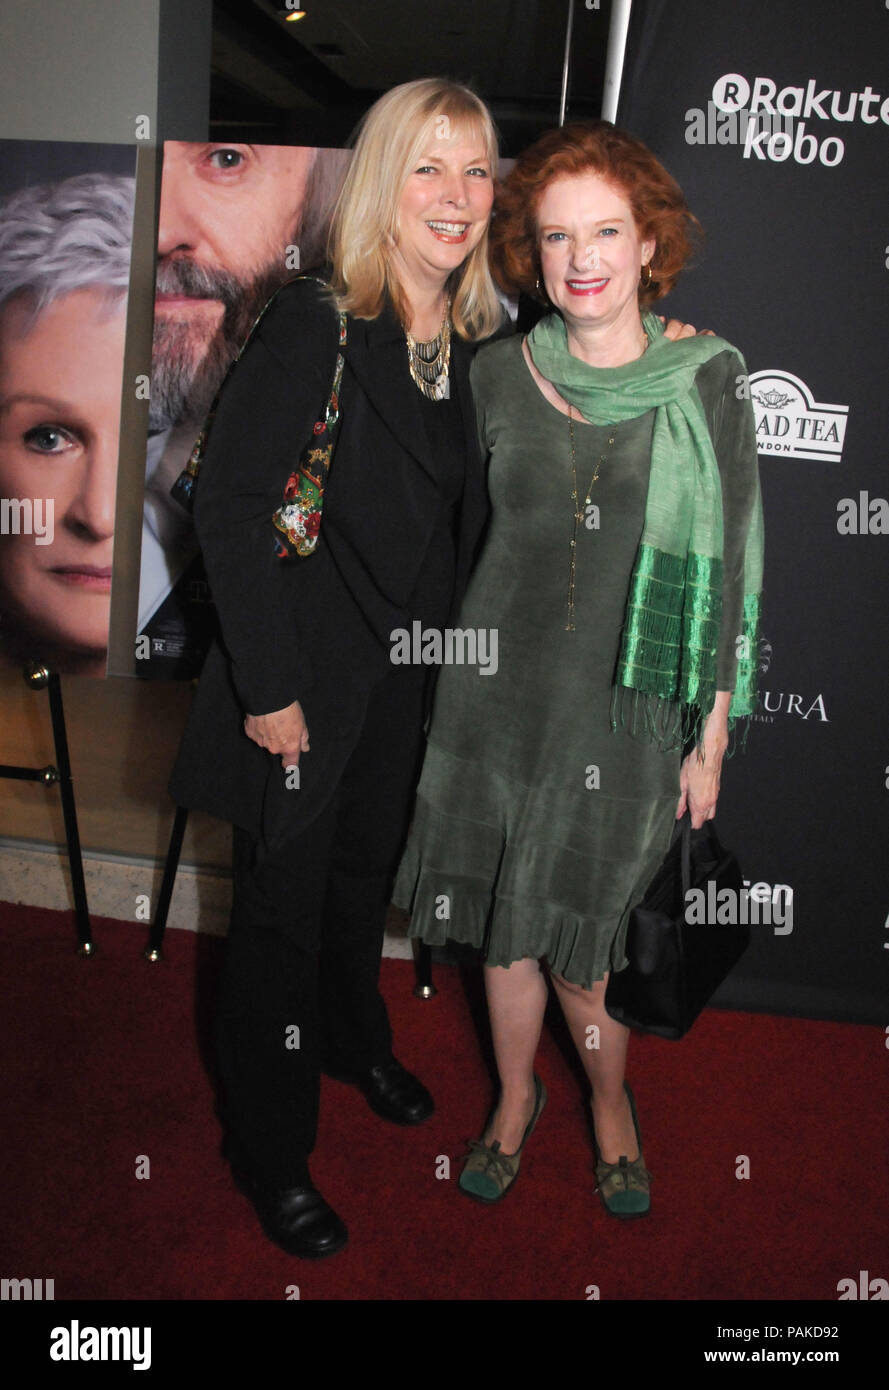 Los Angeles, USA. 23rd July 2018. Actresses Candy Clark and Lisa Pelikan attend the Los Angeles Premiere of 'The Wife' on July 23, 2018 at Pacific Design Center, Silverscreen Theater in West Hollywood, California. Photo by Barry King/Alamy Live News Stock Photo